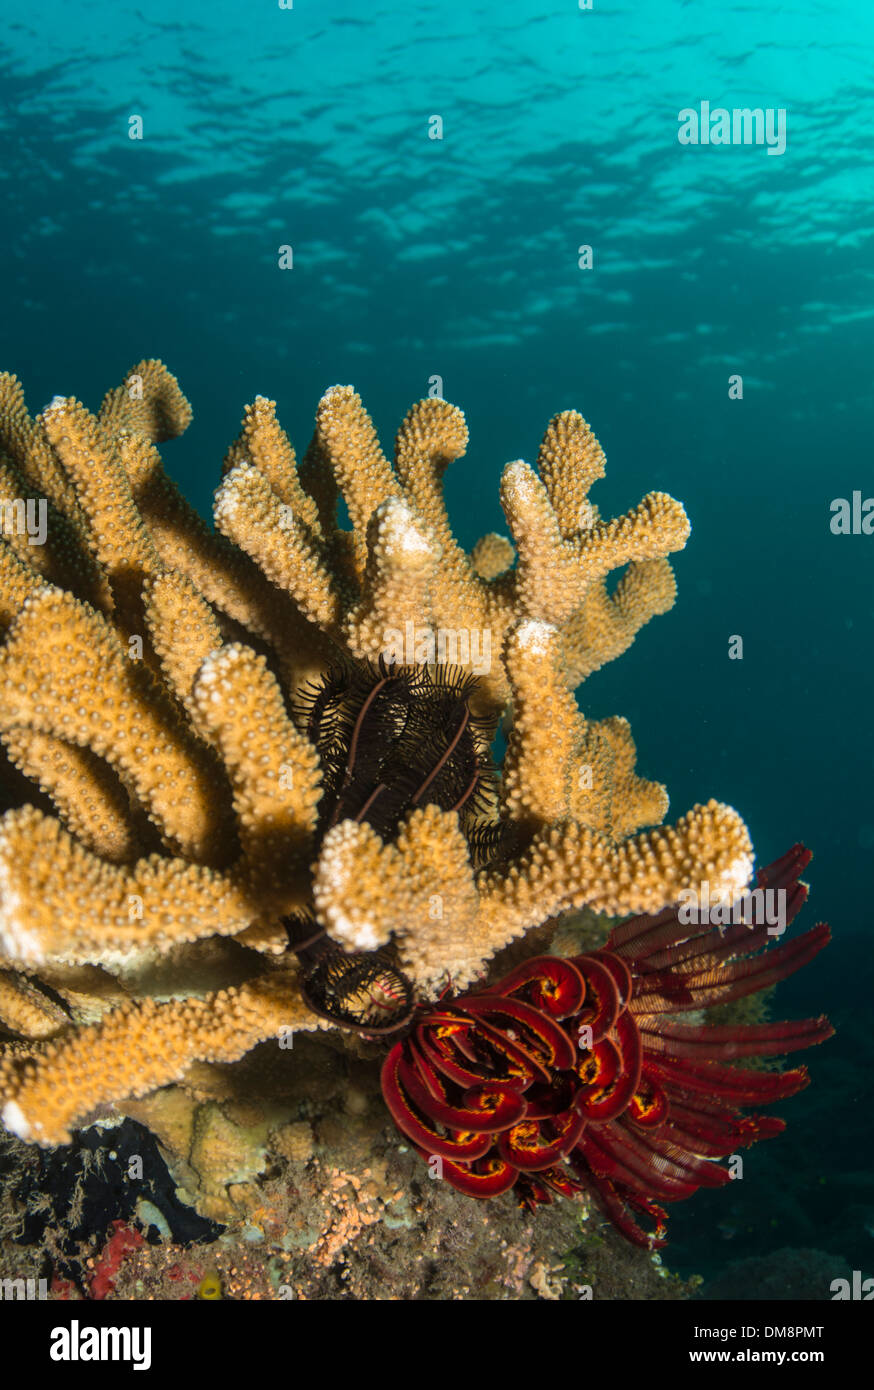 Underwater landscape with hard coral and feather stars Stock Photo